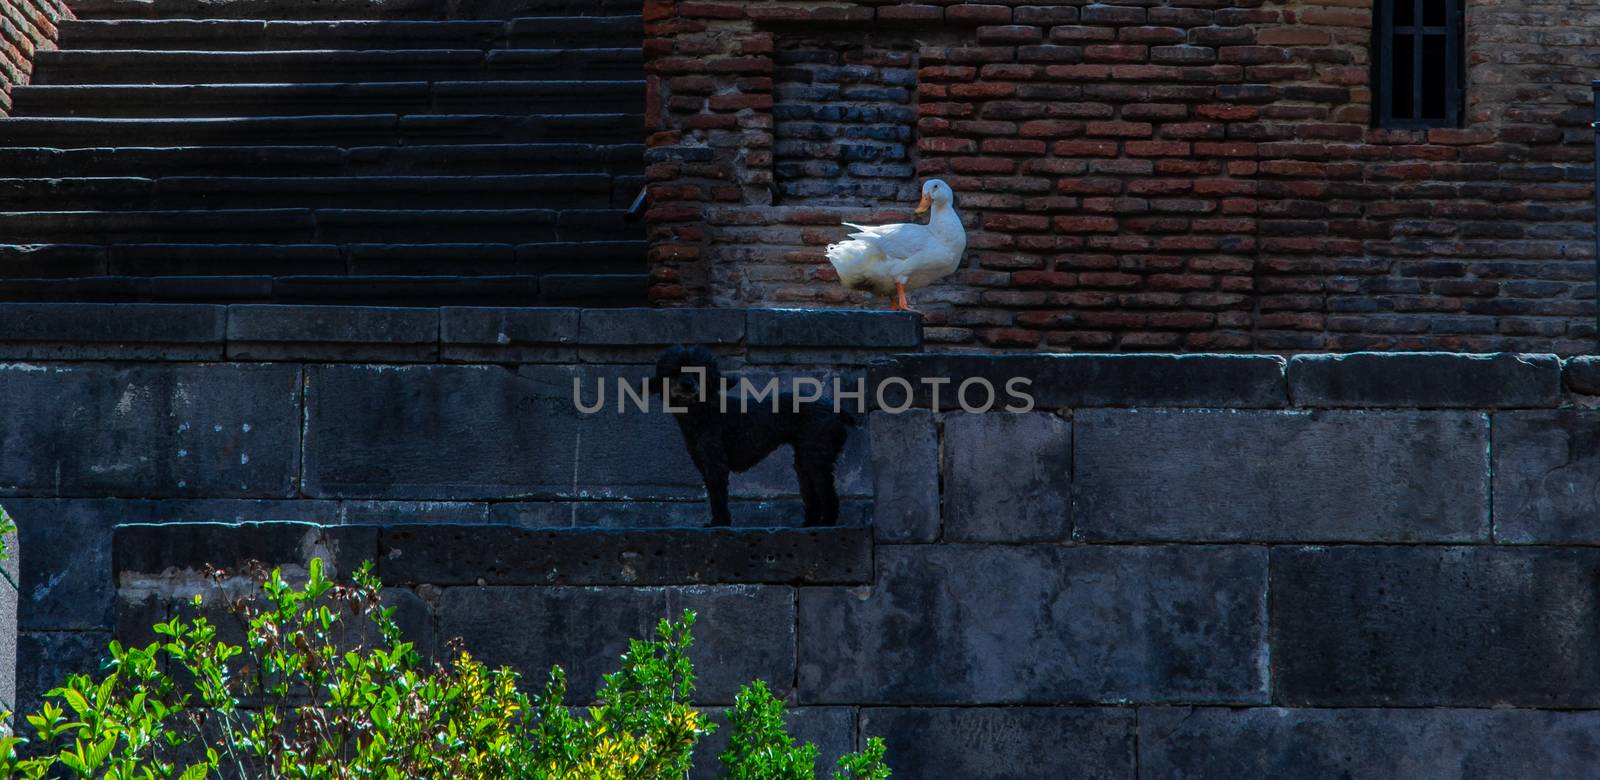 28 May 2019, TBILISI, GEORGIA: The symbol of Betlemi stair street in Old Town goose Vasil watching around